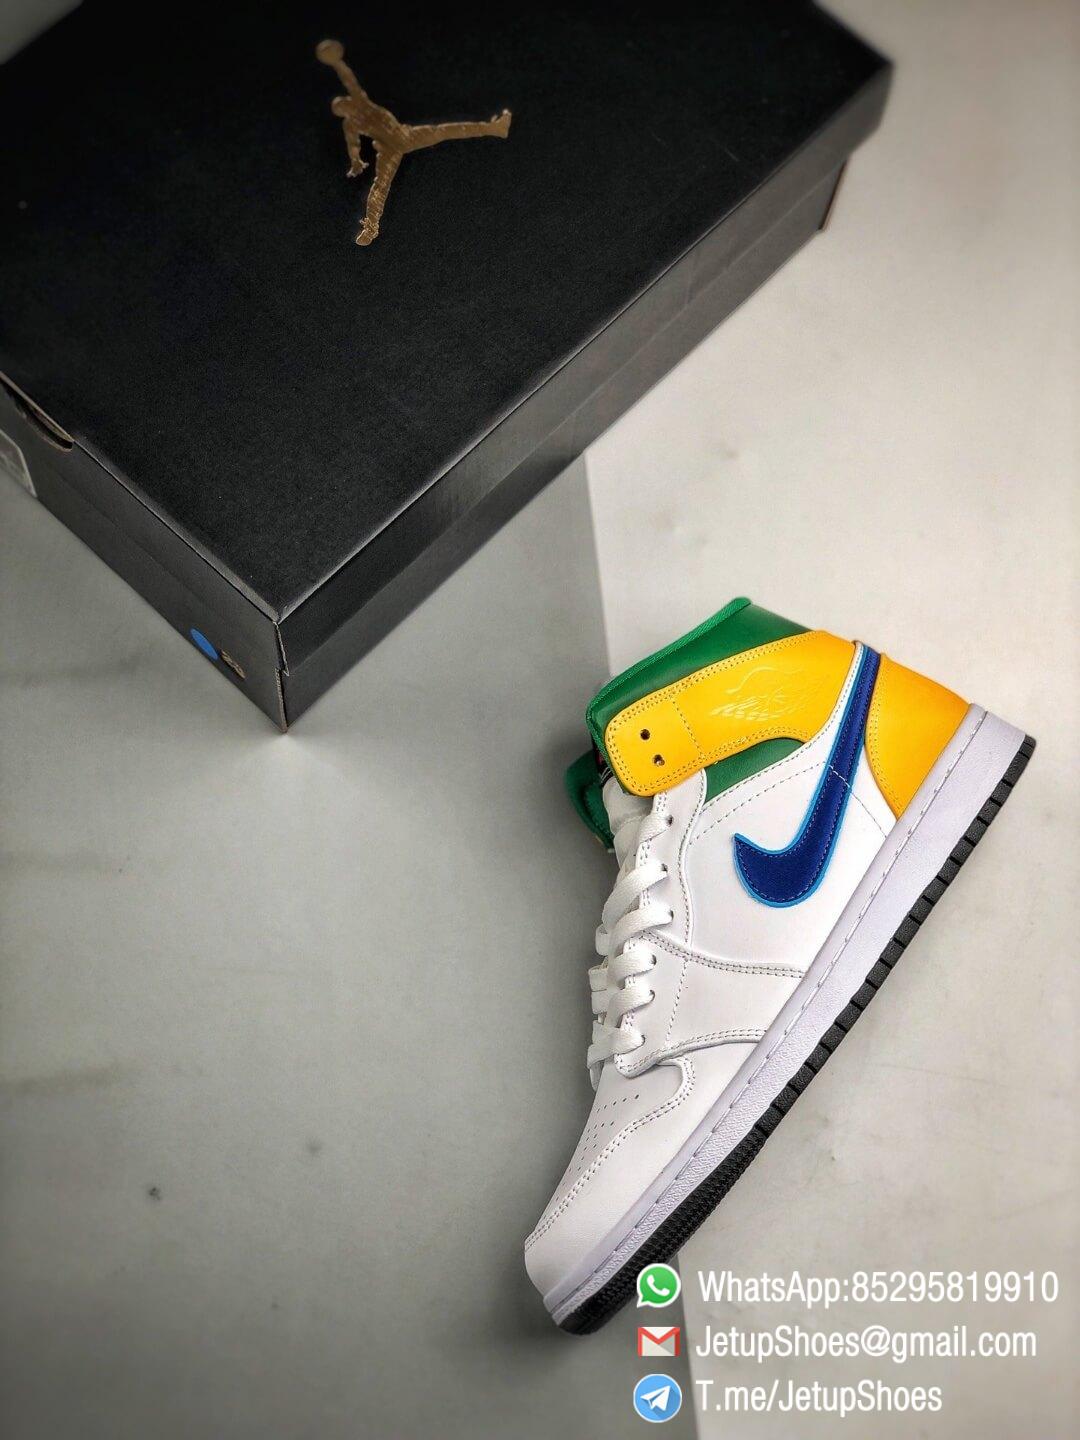 The Air Jordan 1 Mid GS White Court Purple Teal Repsneaker White Leather Upper Green Collar and Yellow Overlay 09